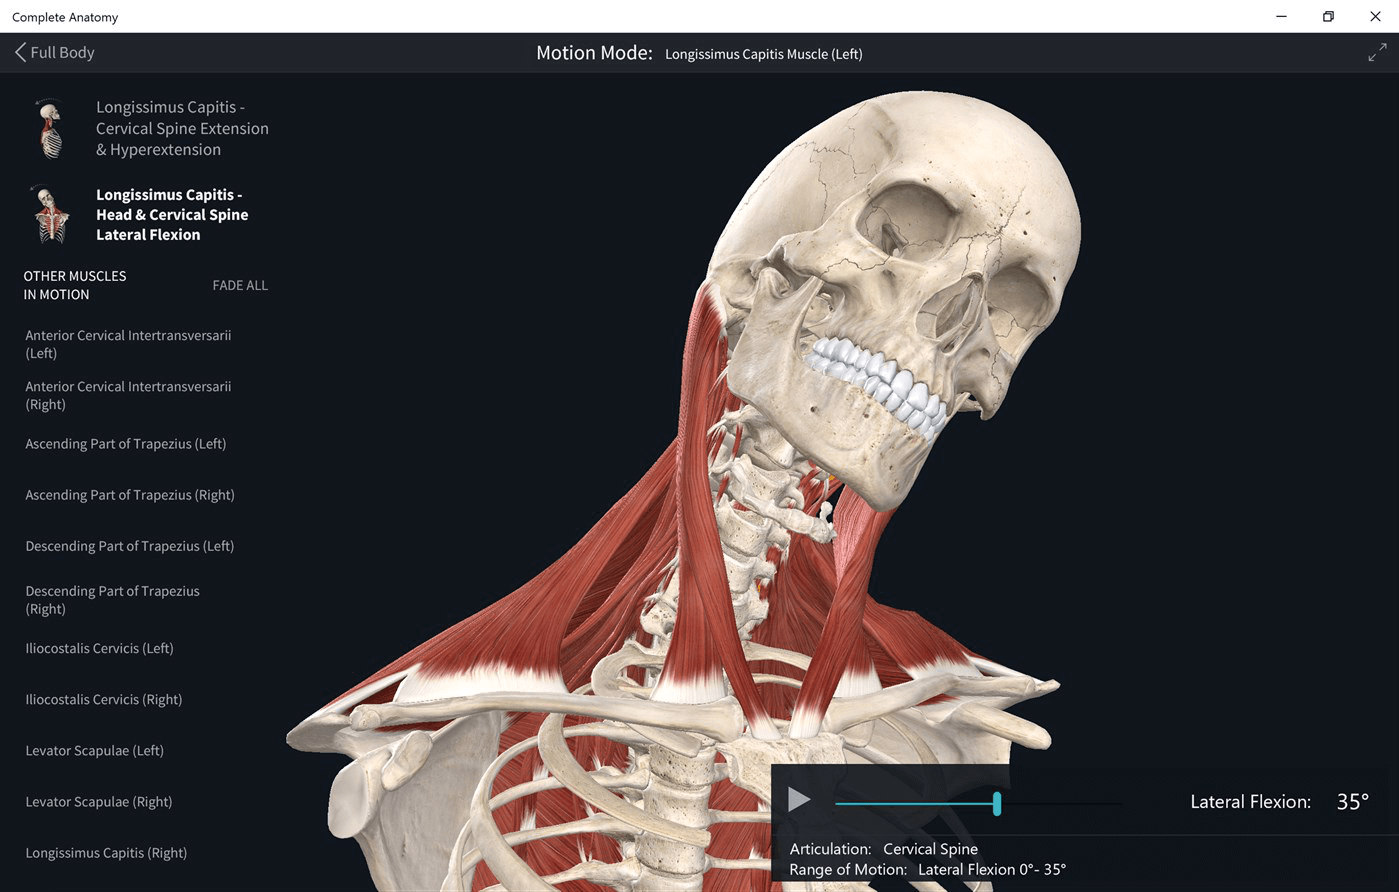 Complete Anatomy app [free download]